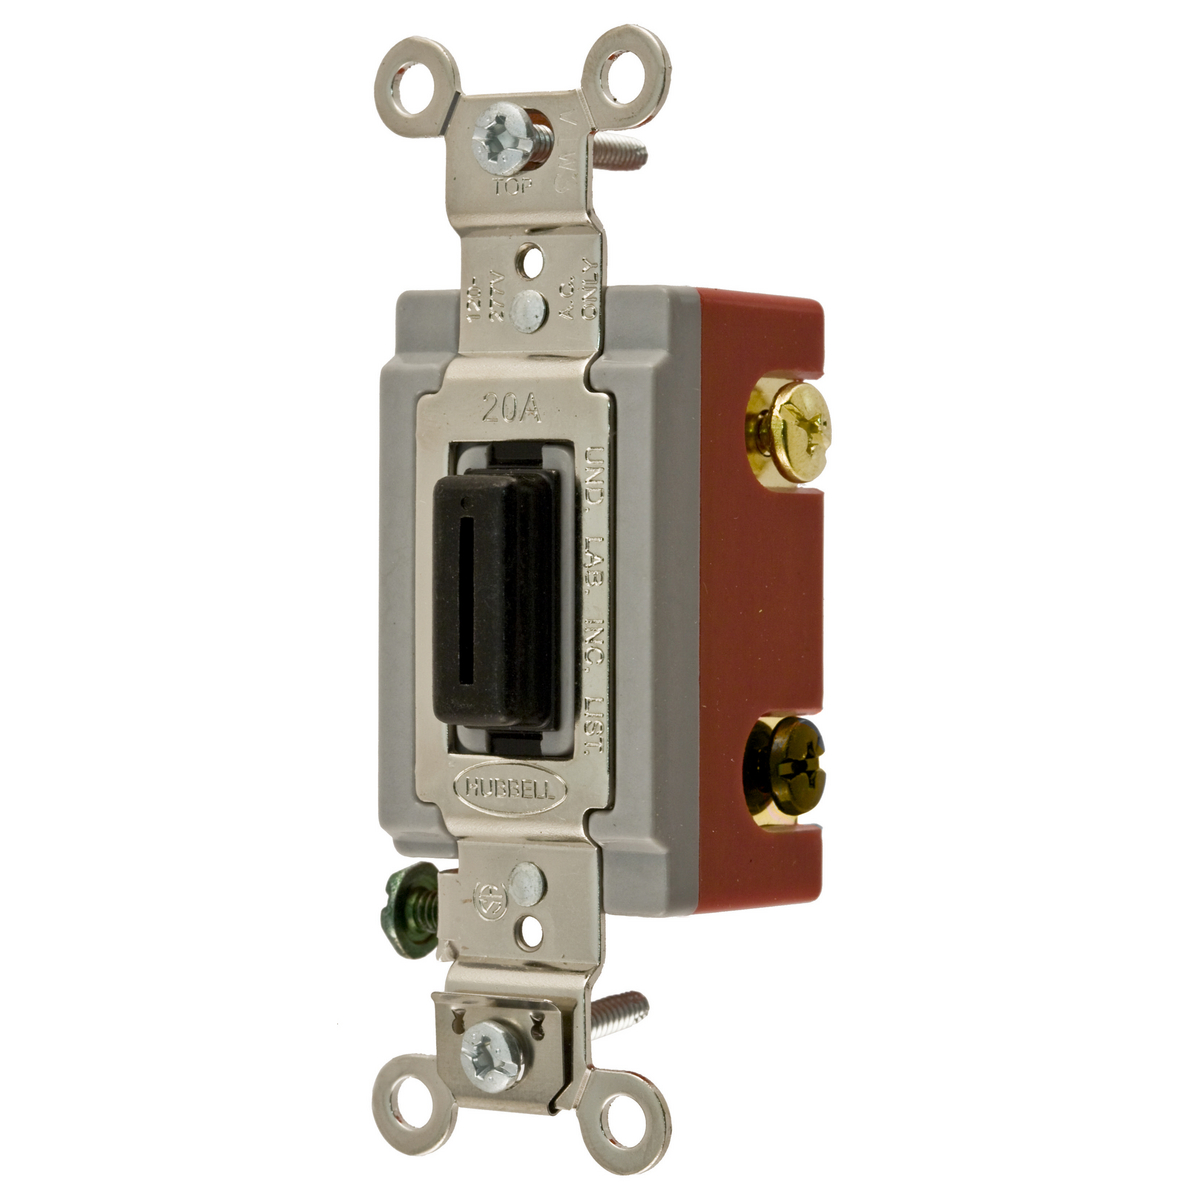 Hubbell HBL1223-L 20A 120/277V 3Way Black Locking Switch. Extra Heavy Duty  Industrial Series Independent Electric